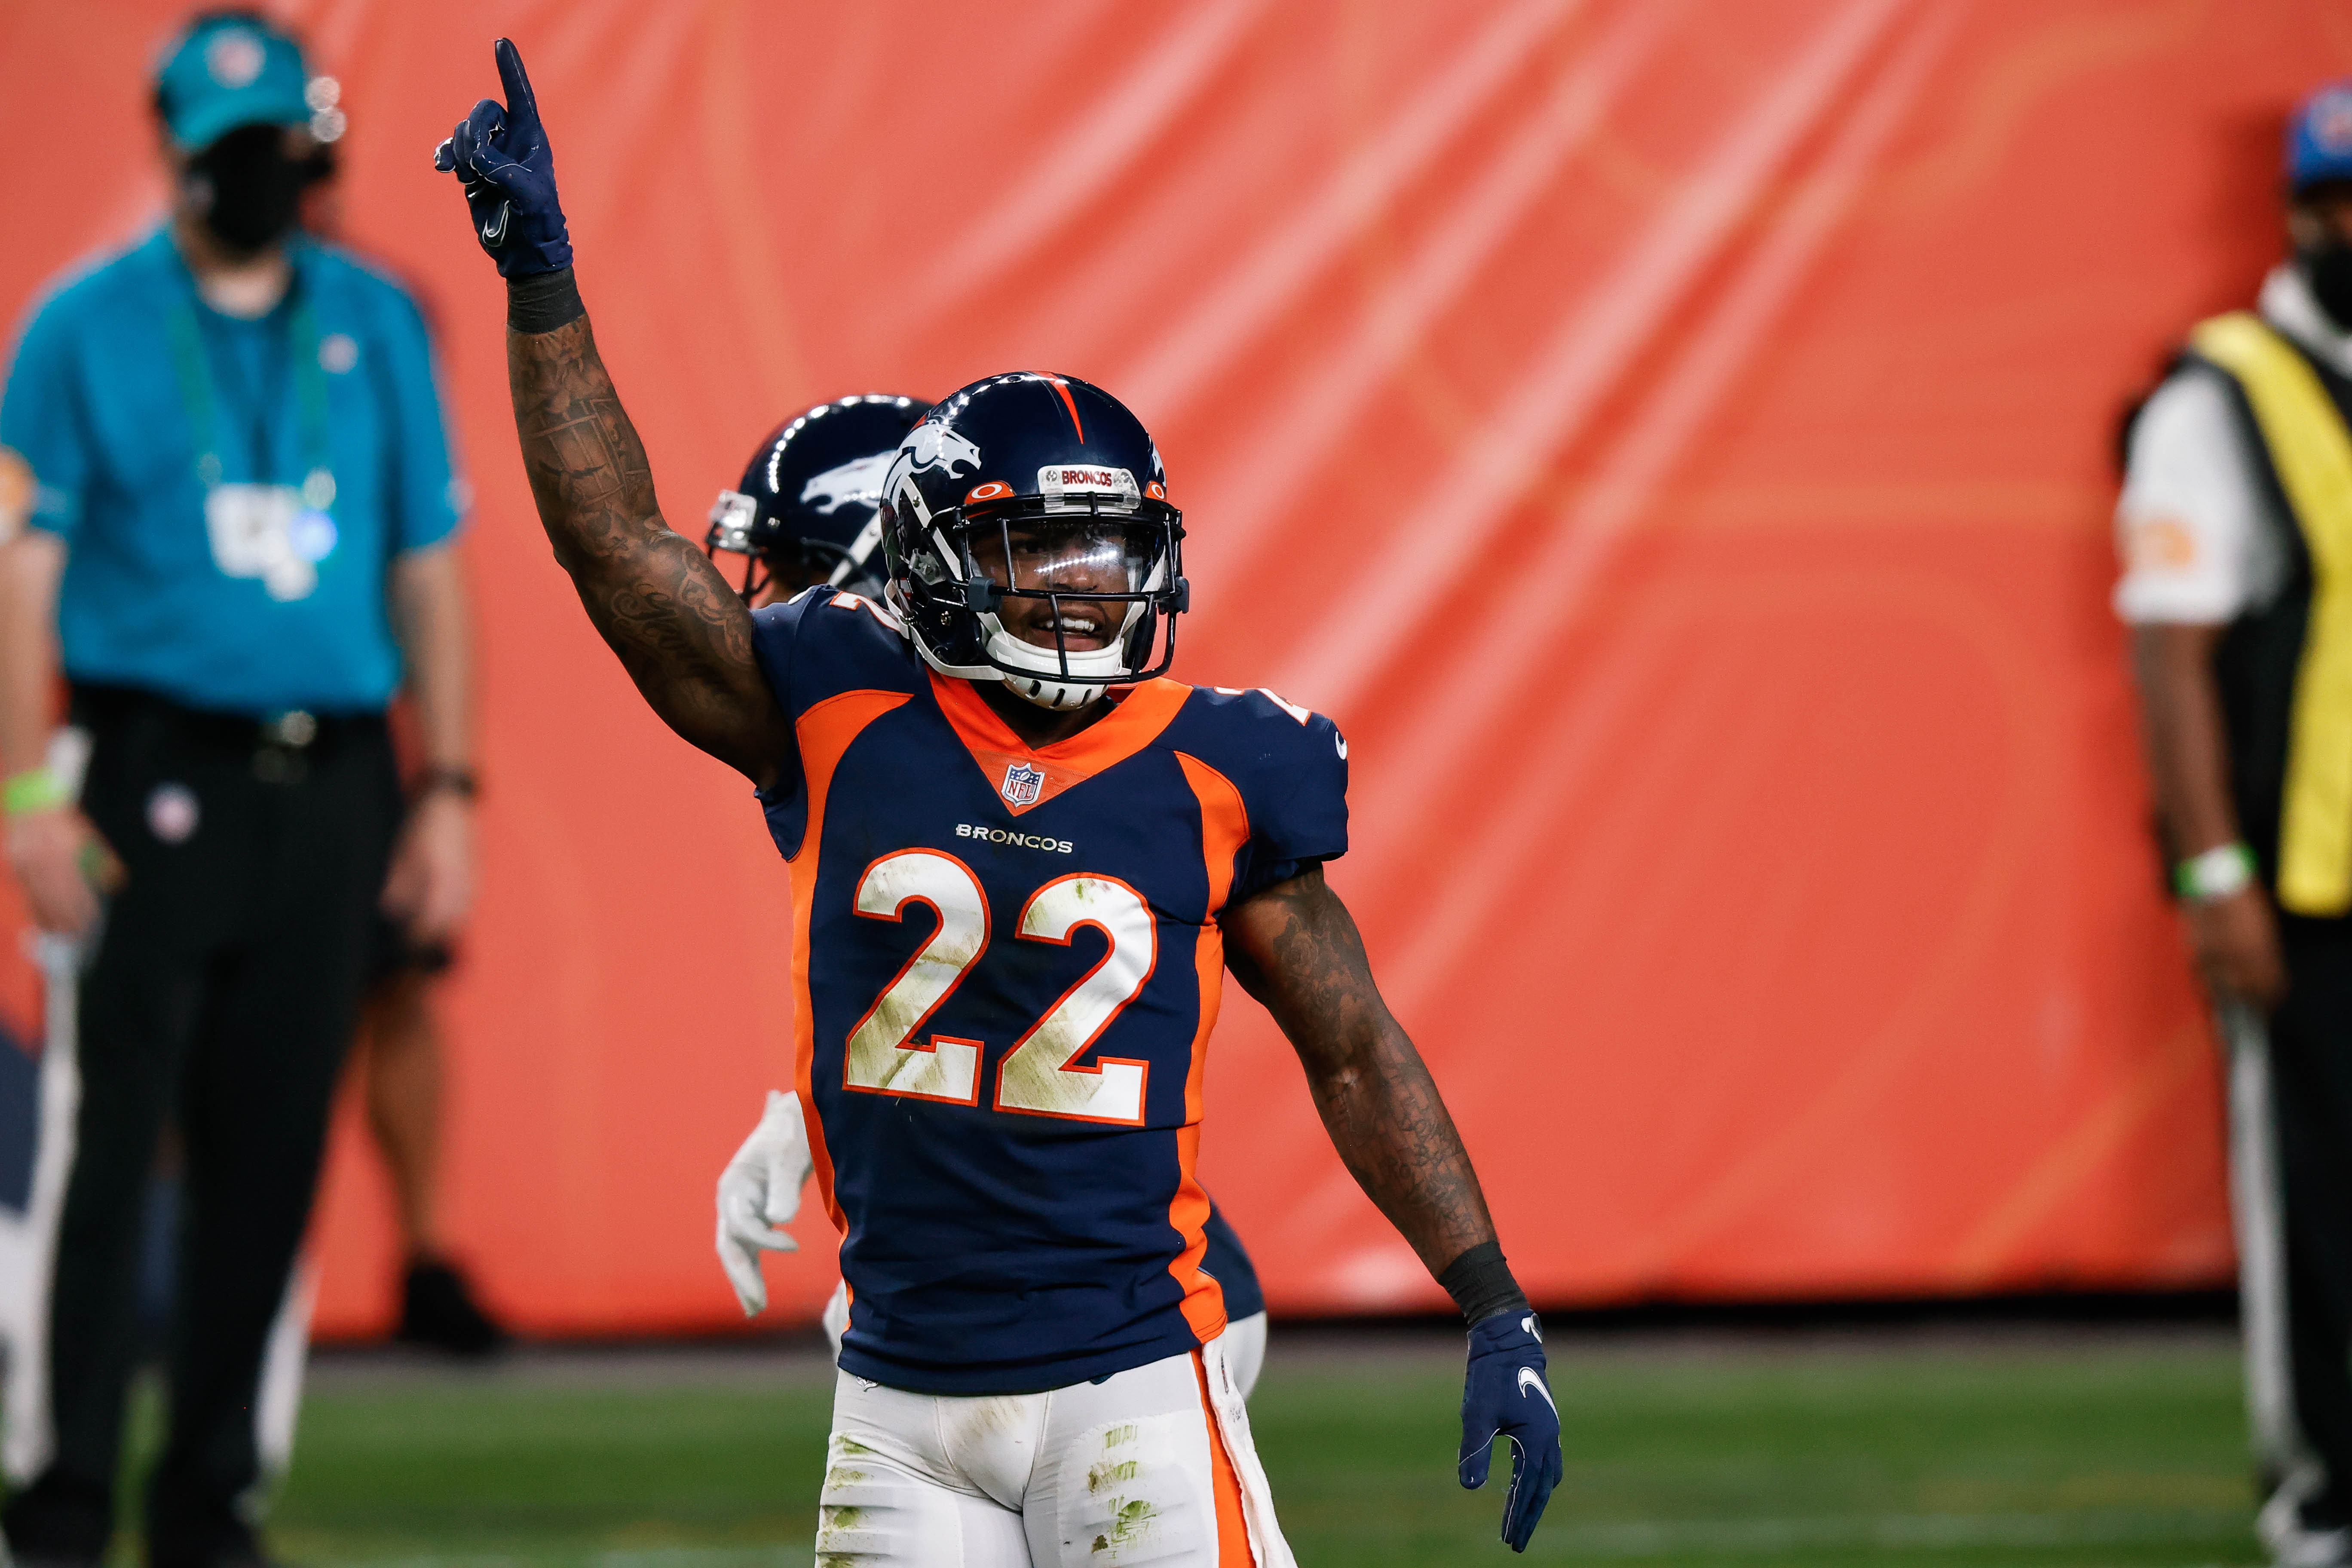 Denver Broncos strong safety Kareem Jackson (22) celebrates after a play in the fourth quarter against the Tennessee Titans at Empower Field at Mile High.